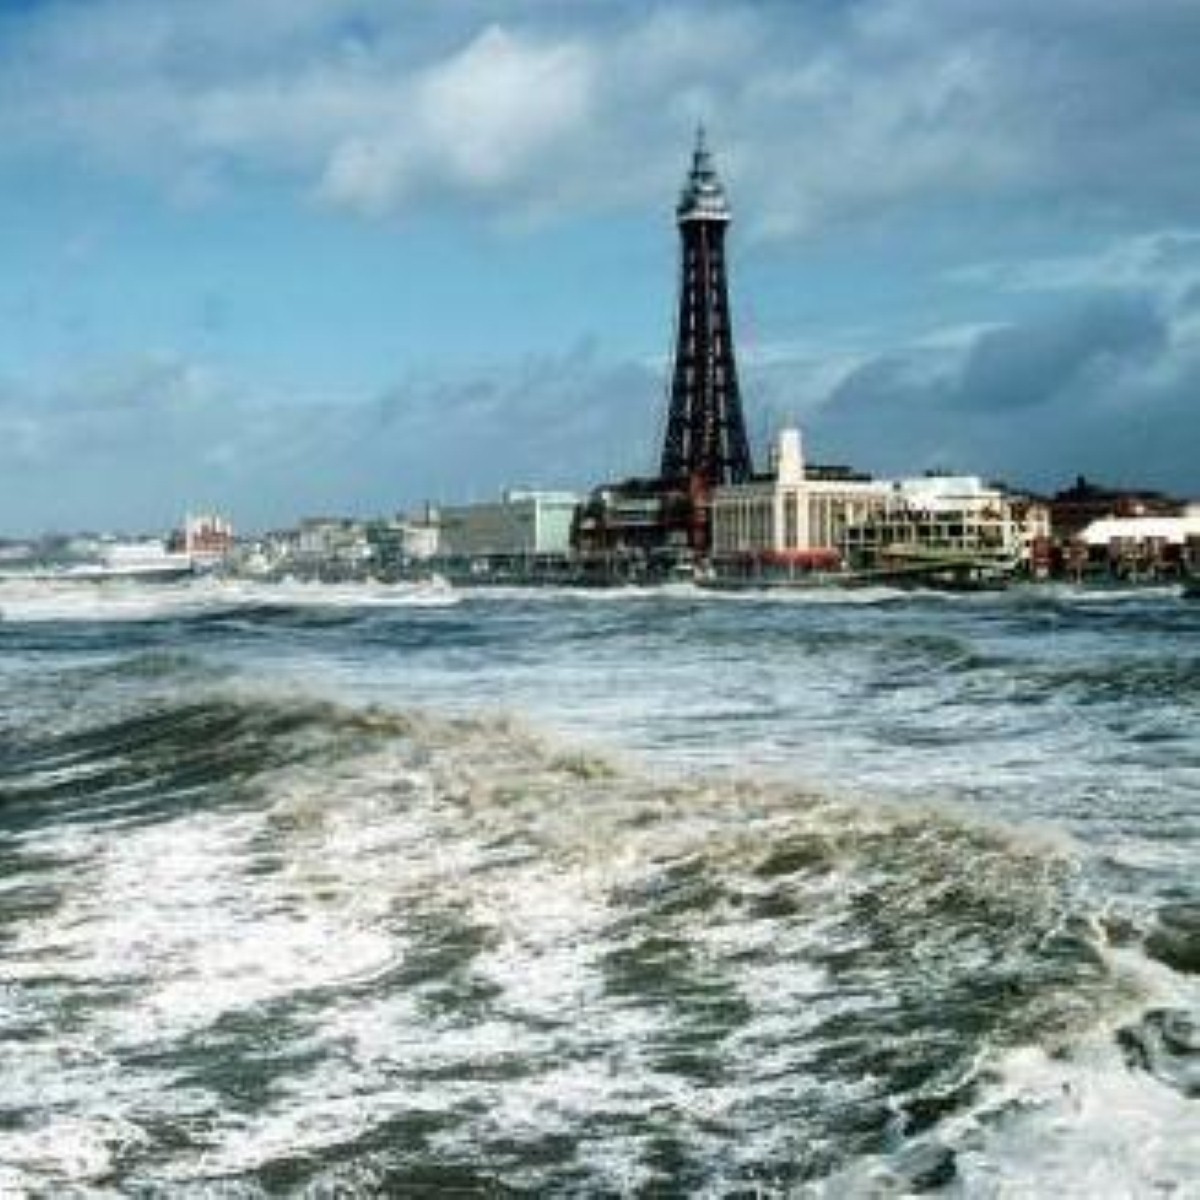 Blackpool was found to be the nation's favourite seaside resort of all time